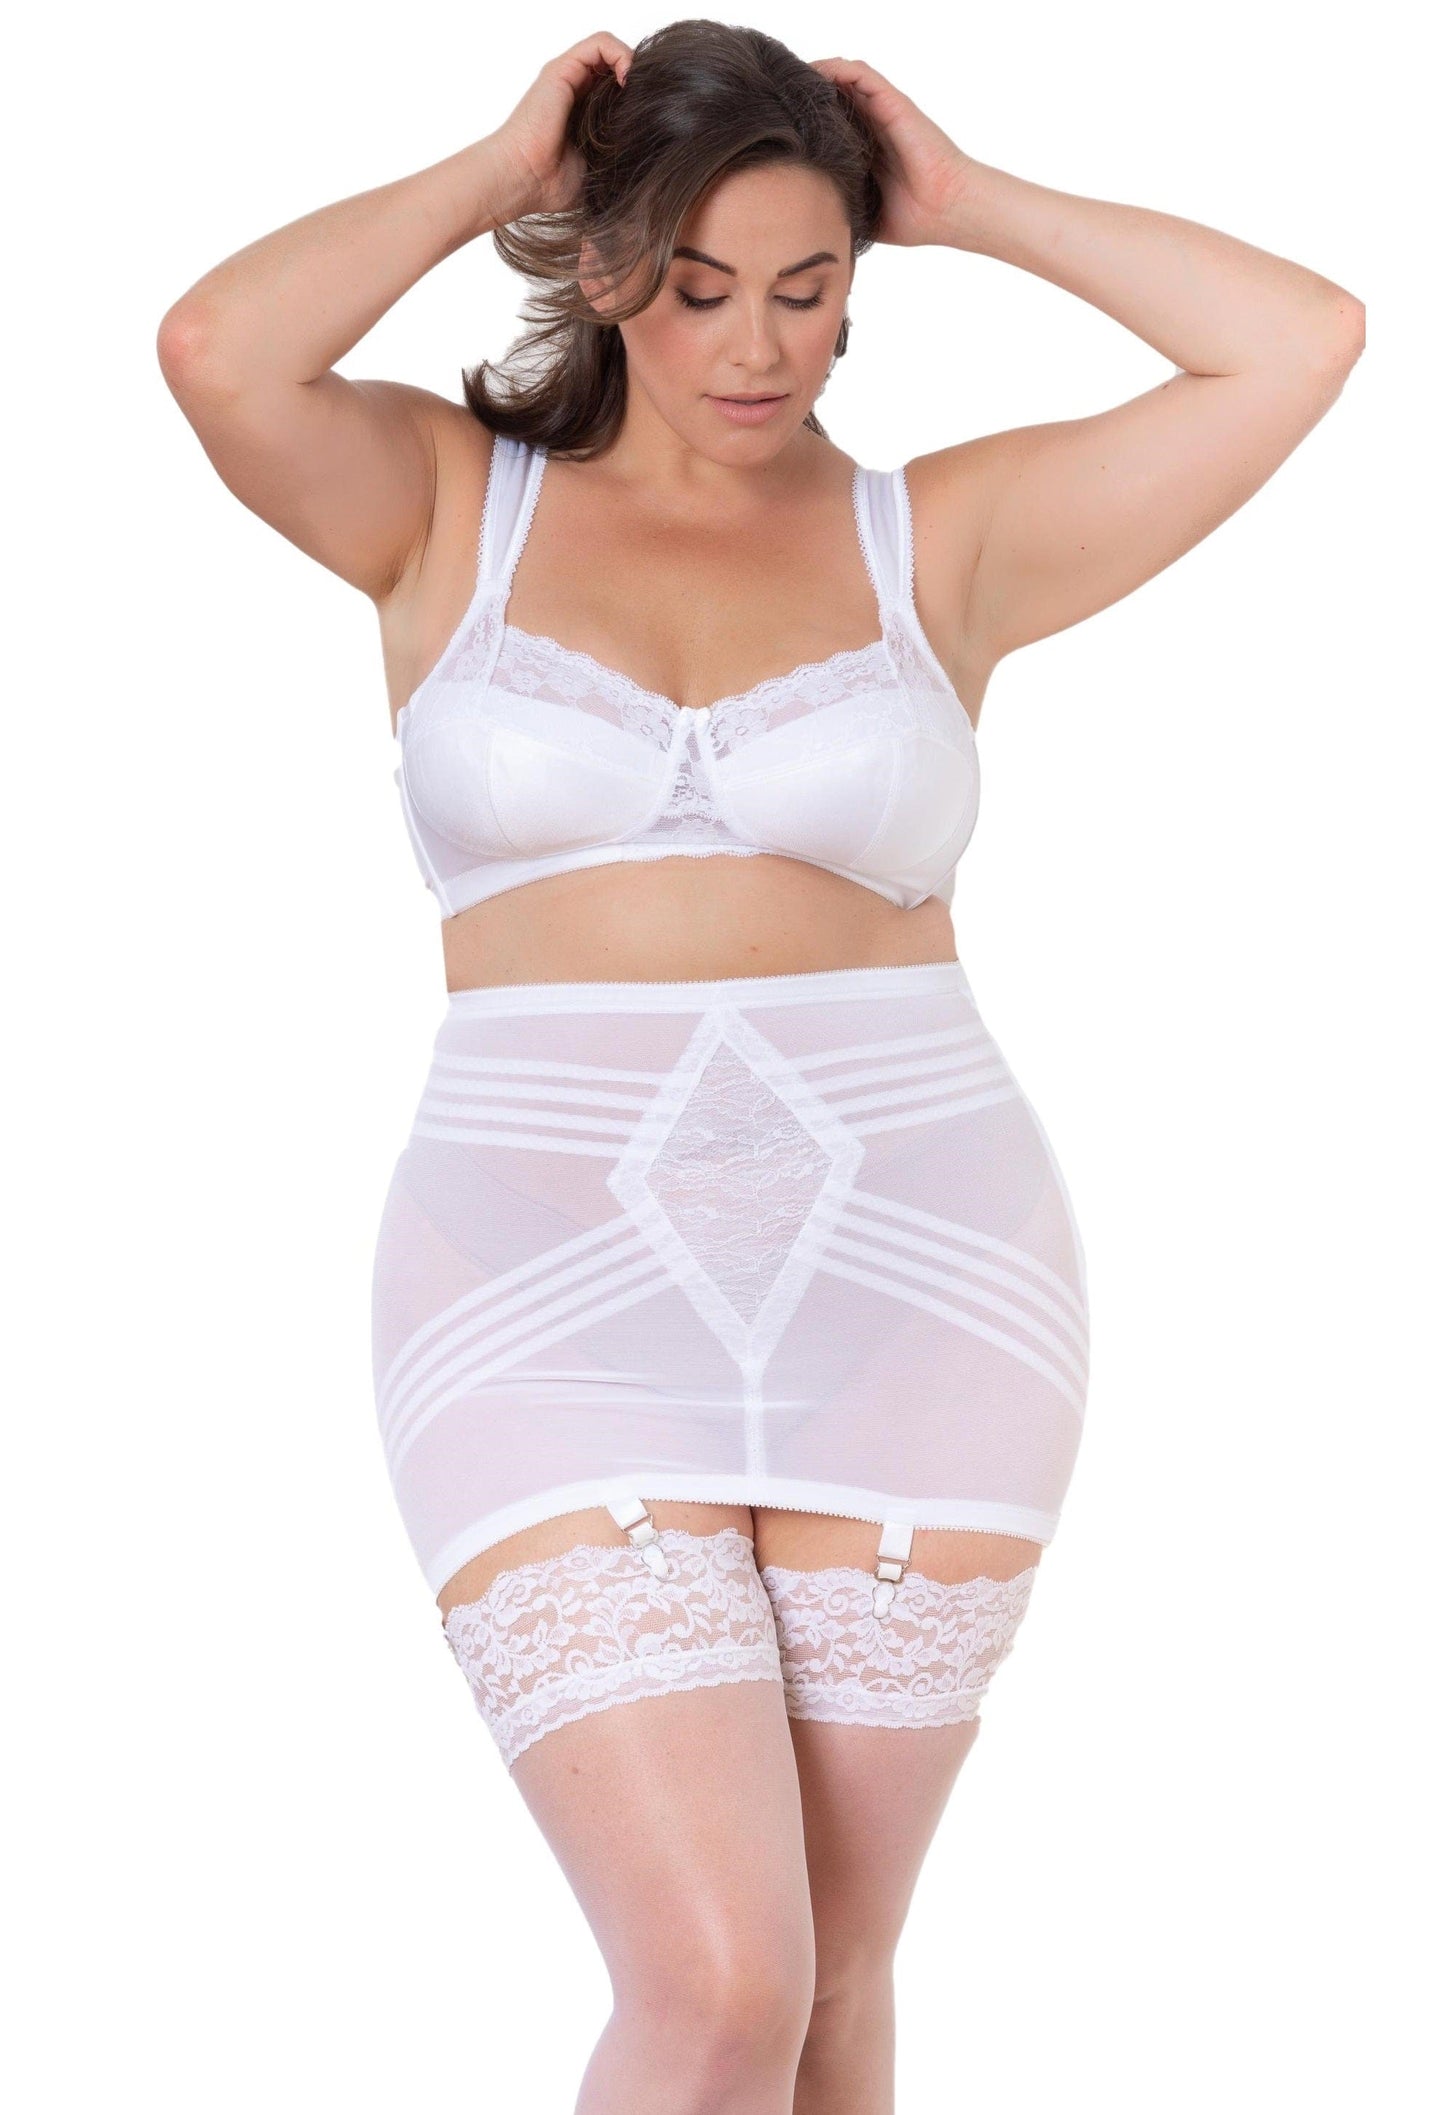 Rago Style 1359 - Open Bottom Girdle Firm Shaping, 8XL/46 Wh